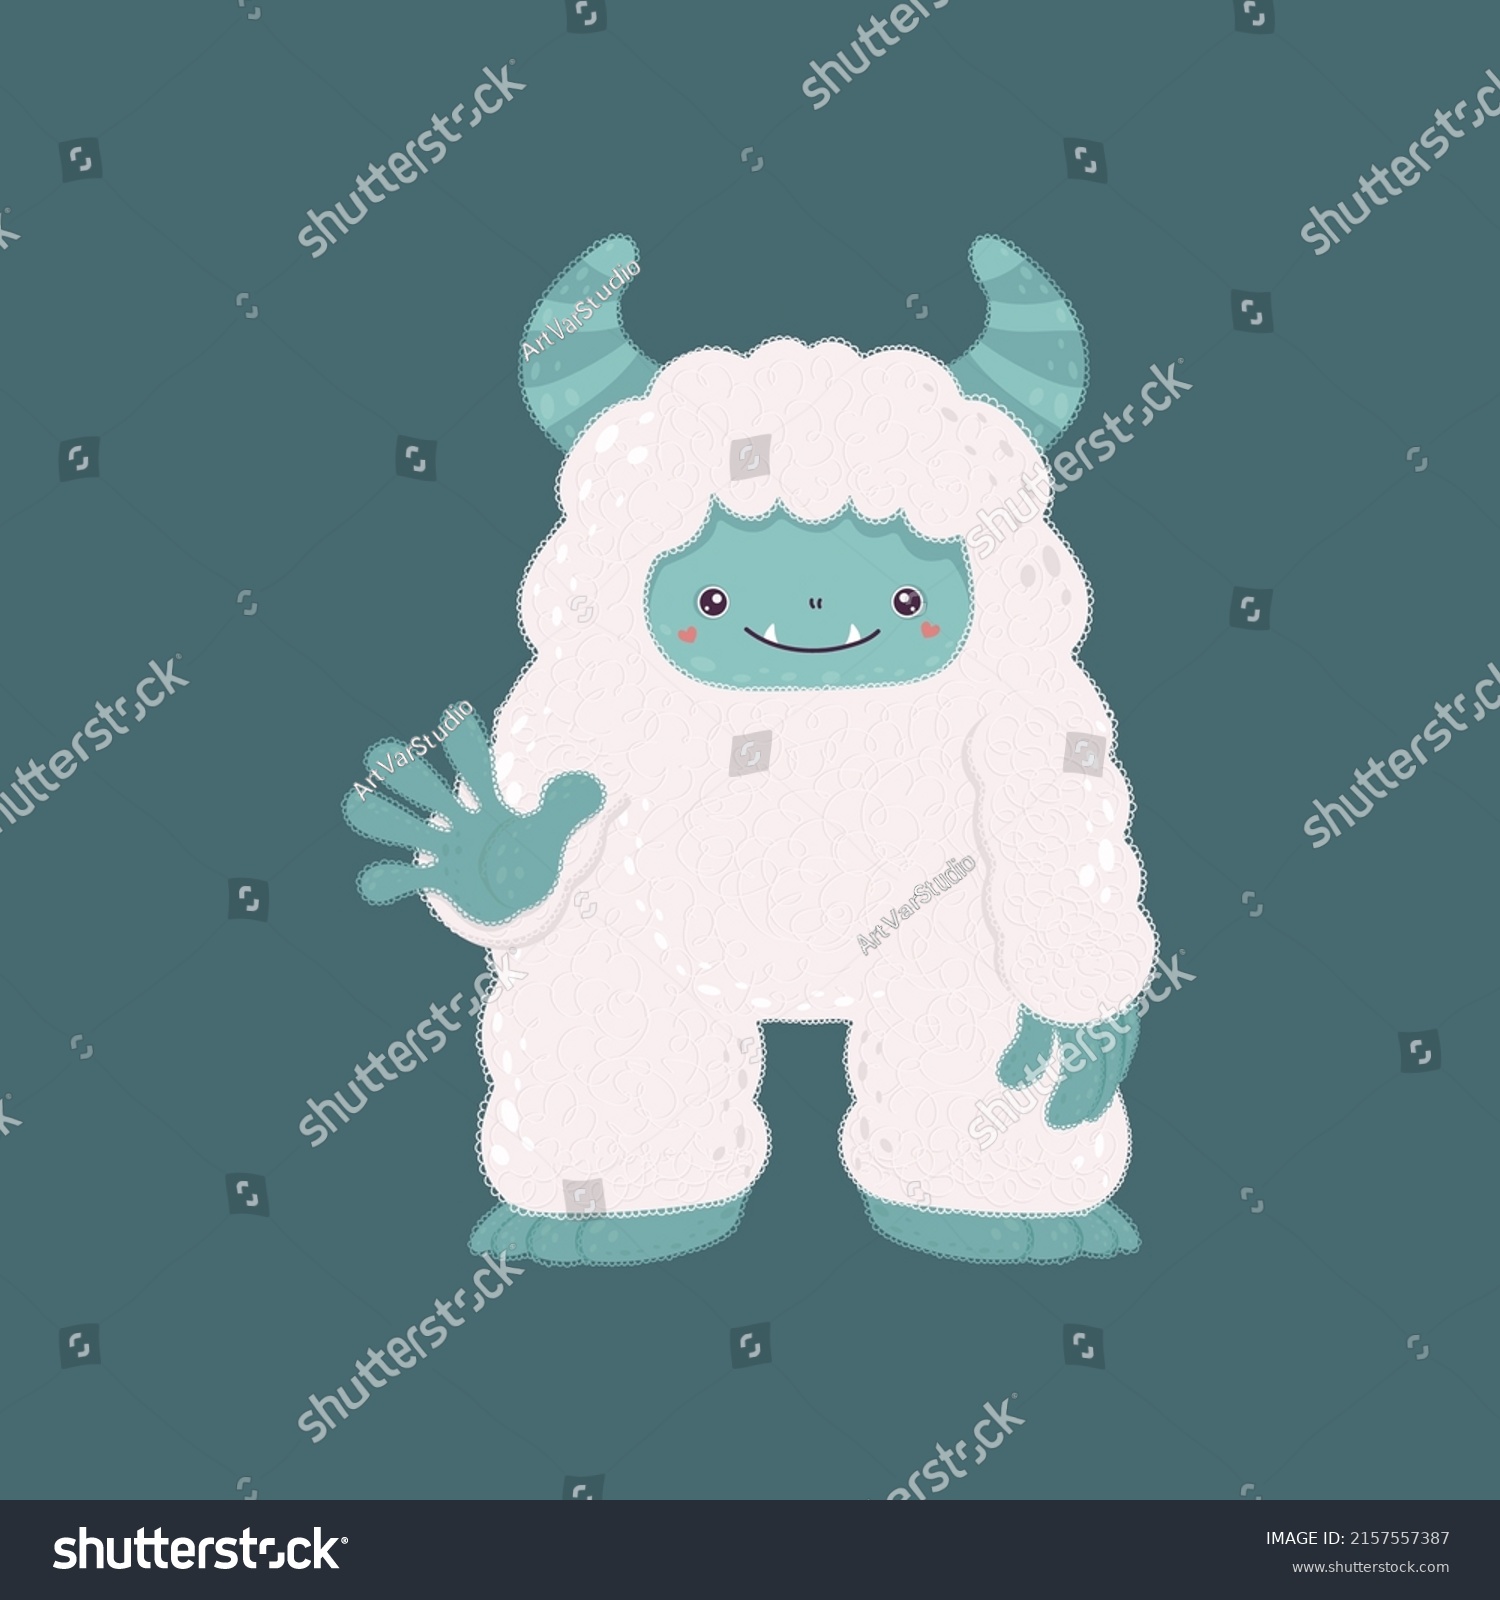 SVG of Vector big foot yeti, cartoon illustration. Vector illustration of a cute monster. Cute little illustration of yeti for kids, baby book, fairy tales, baby shower invitation, textile t-shirt, sticker. svg